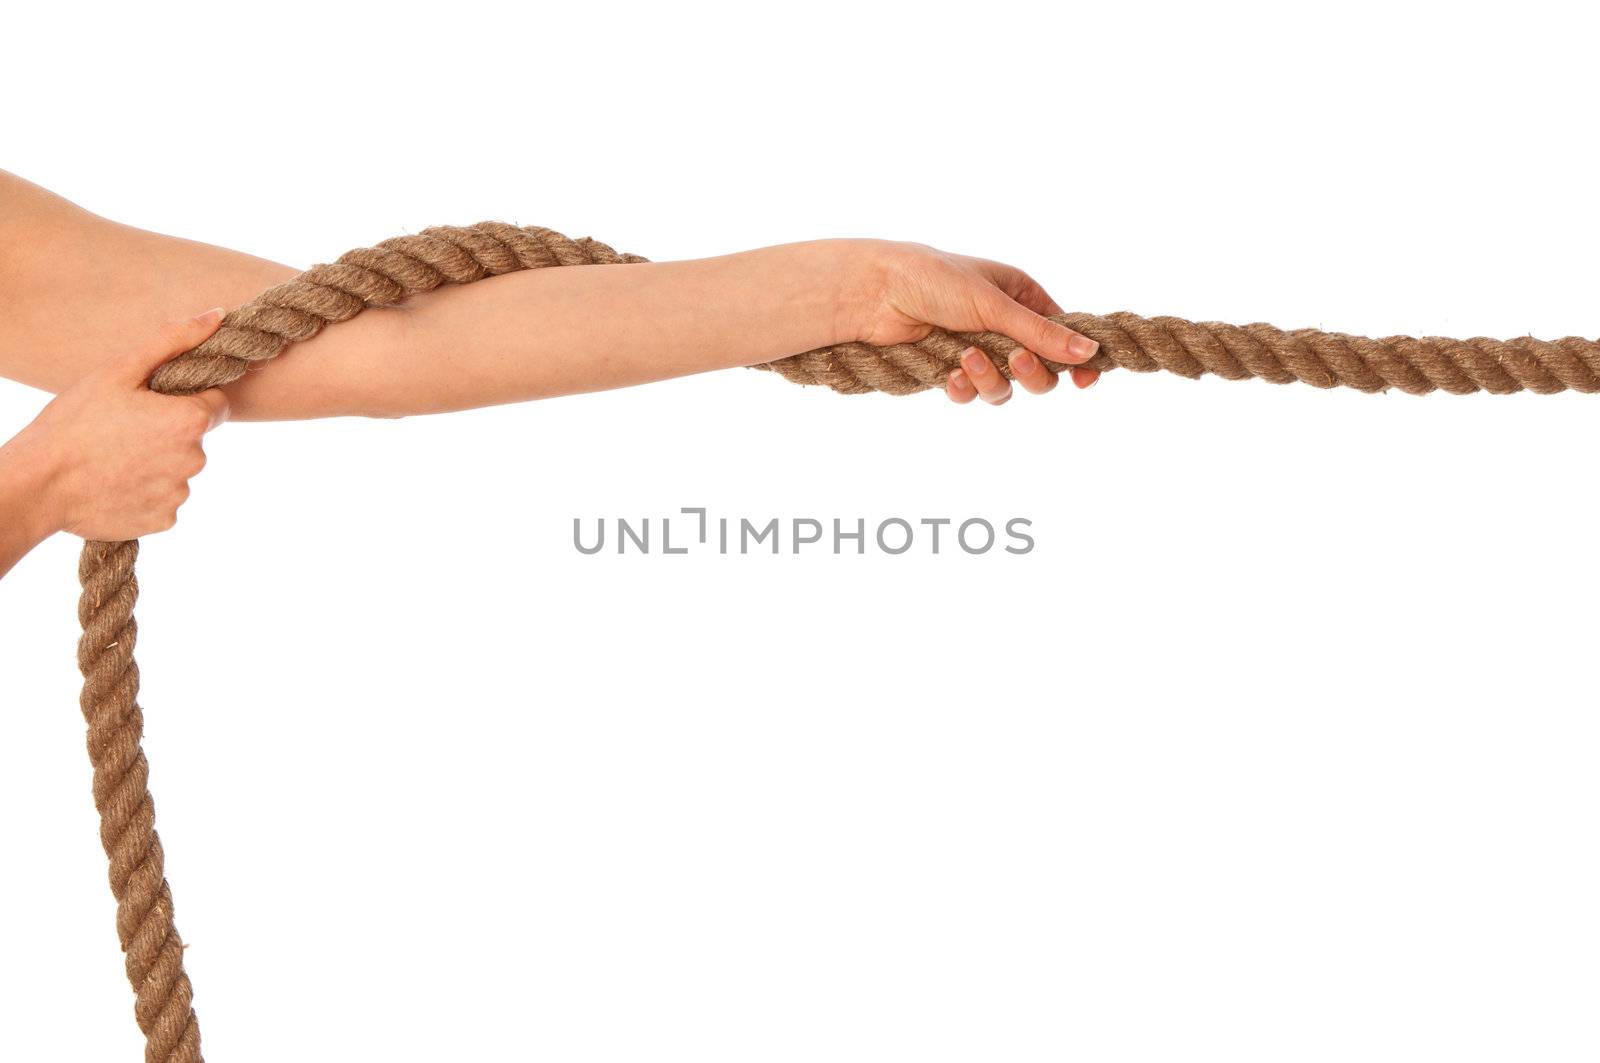 The strong-willed woman plays of pulling of a rope and wins